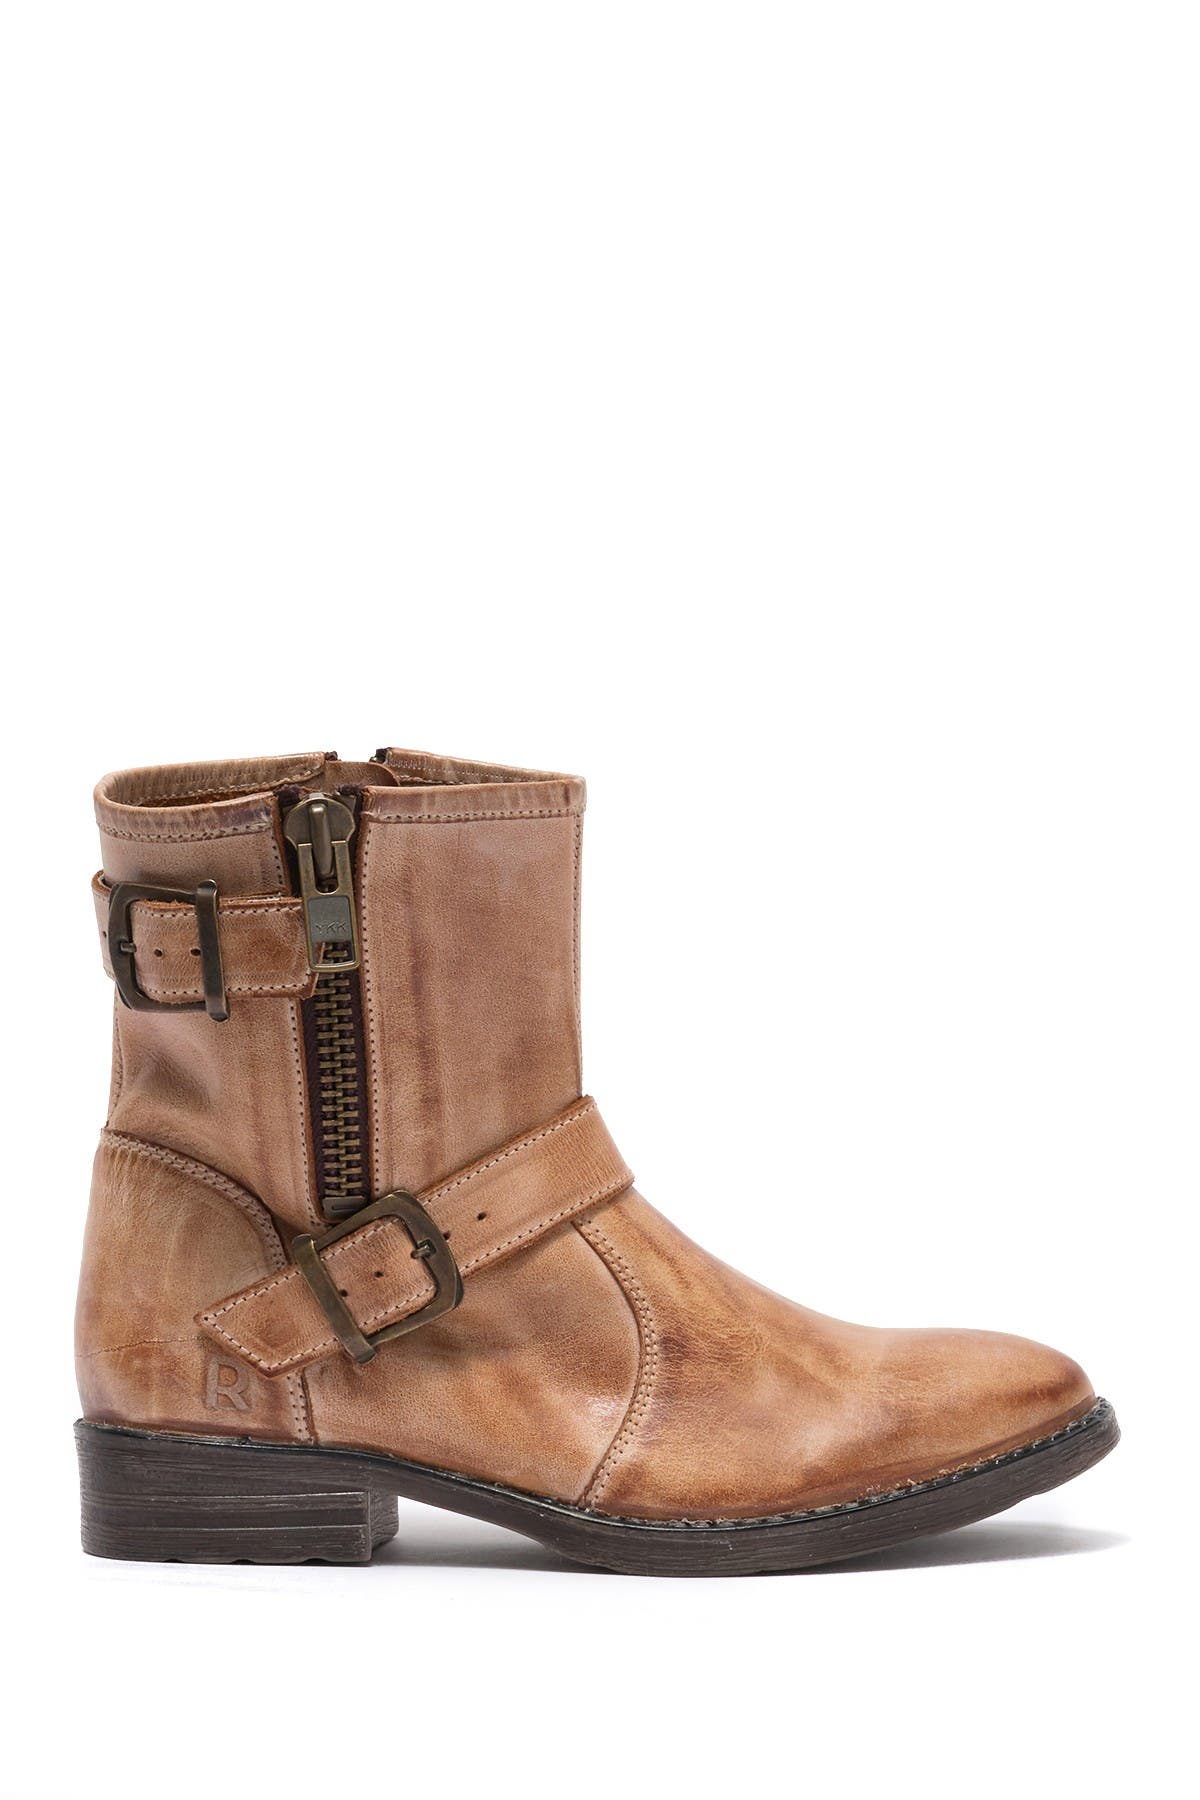 Roan | Celebration Leather Boot 